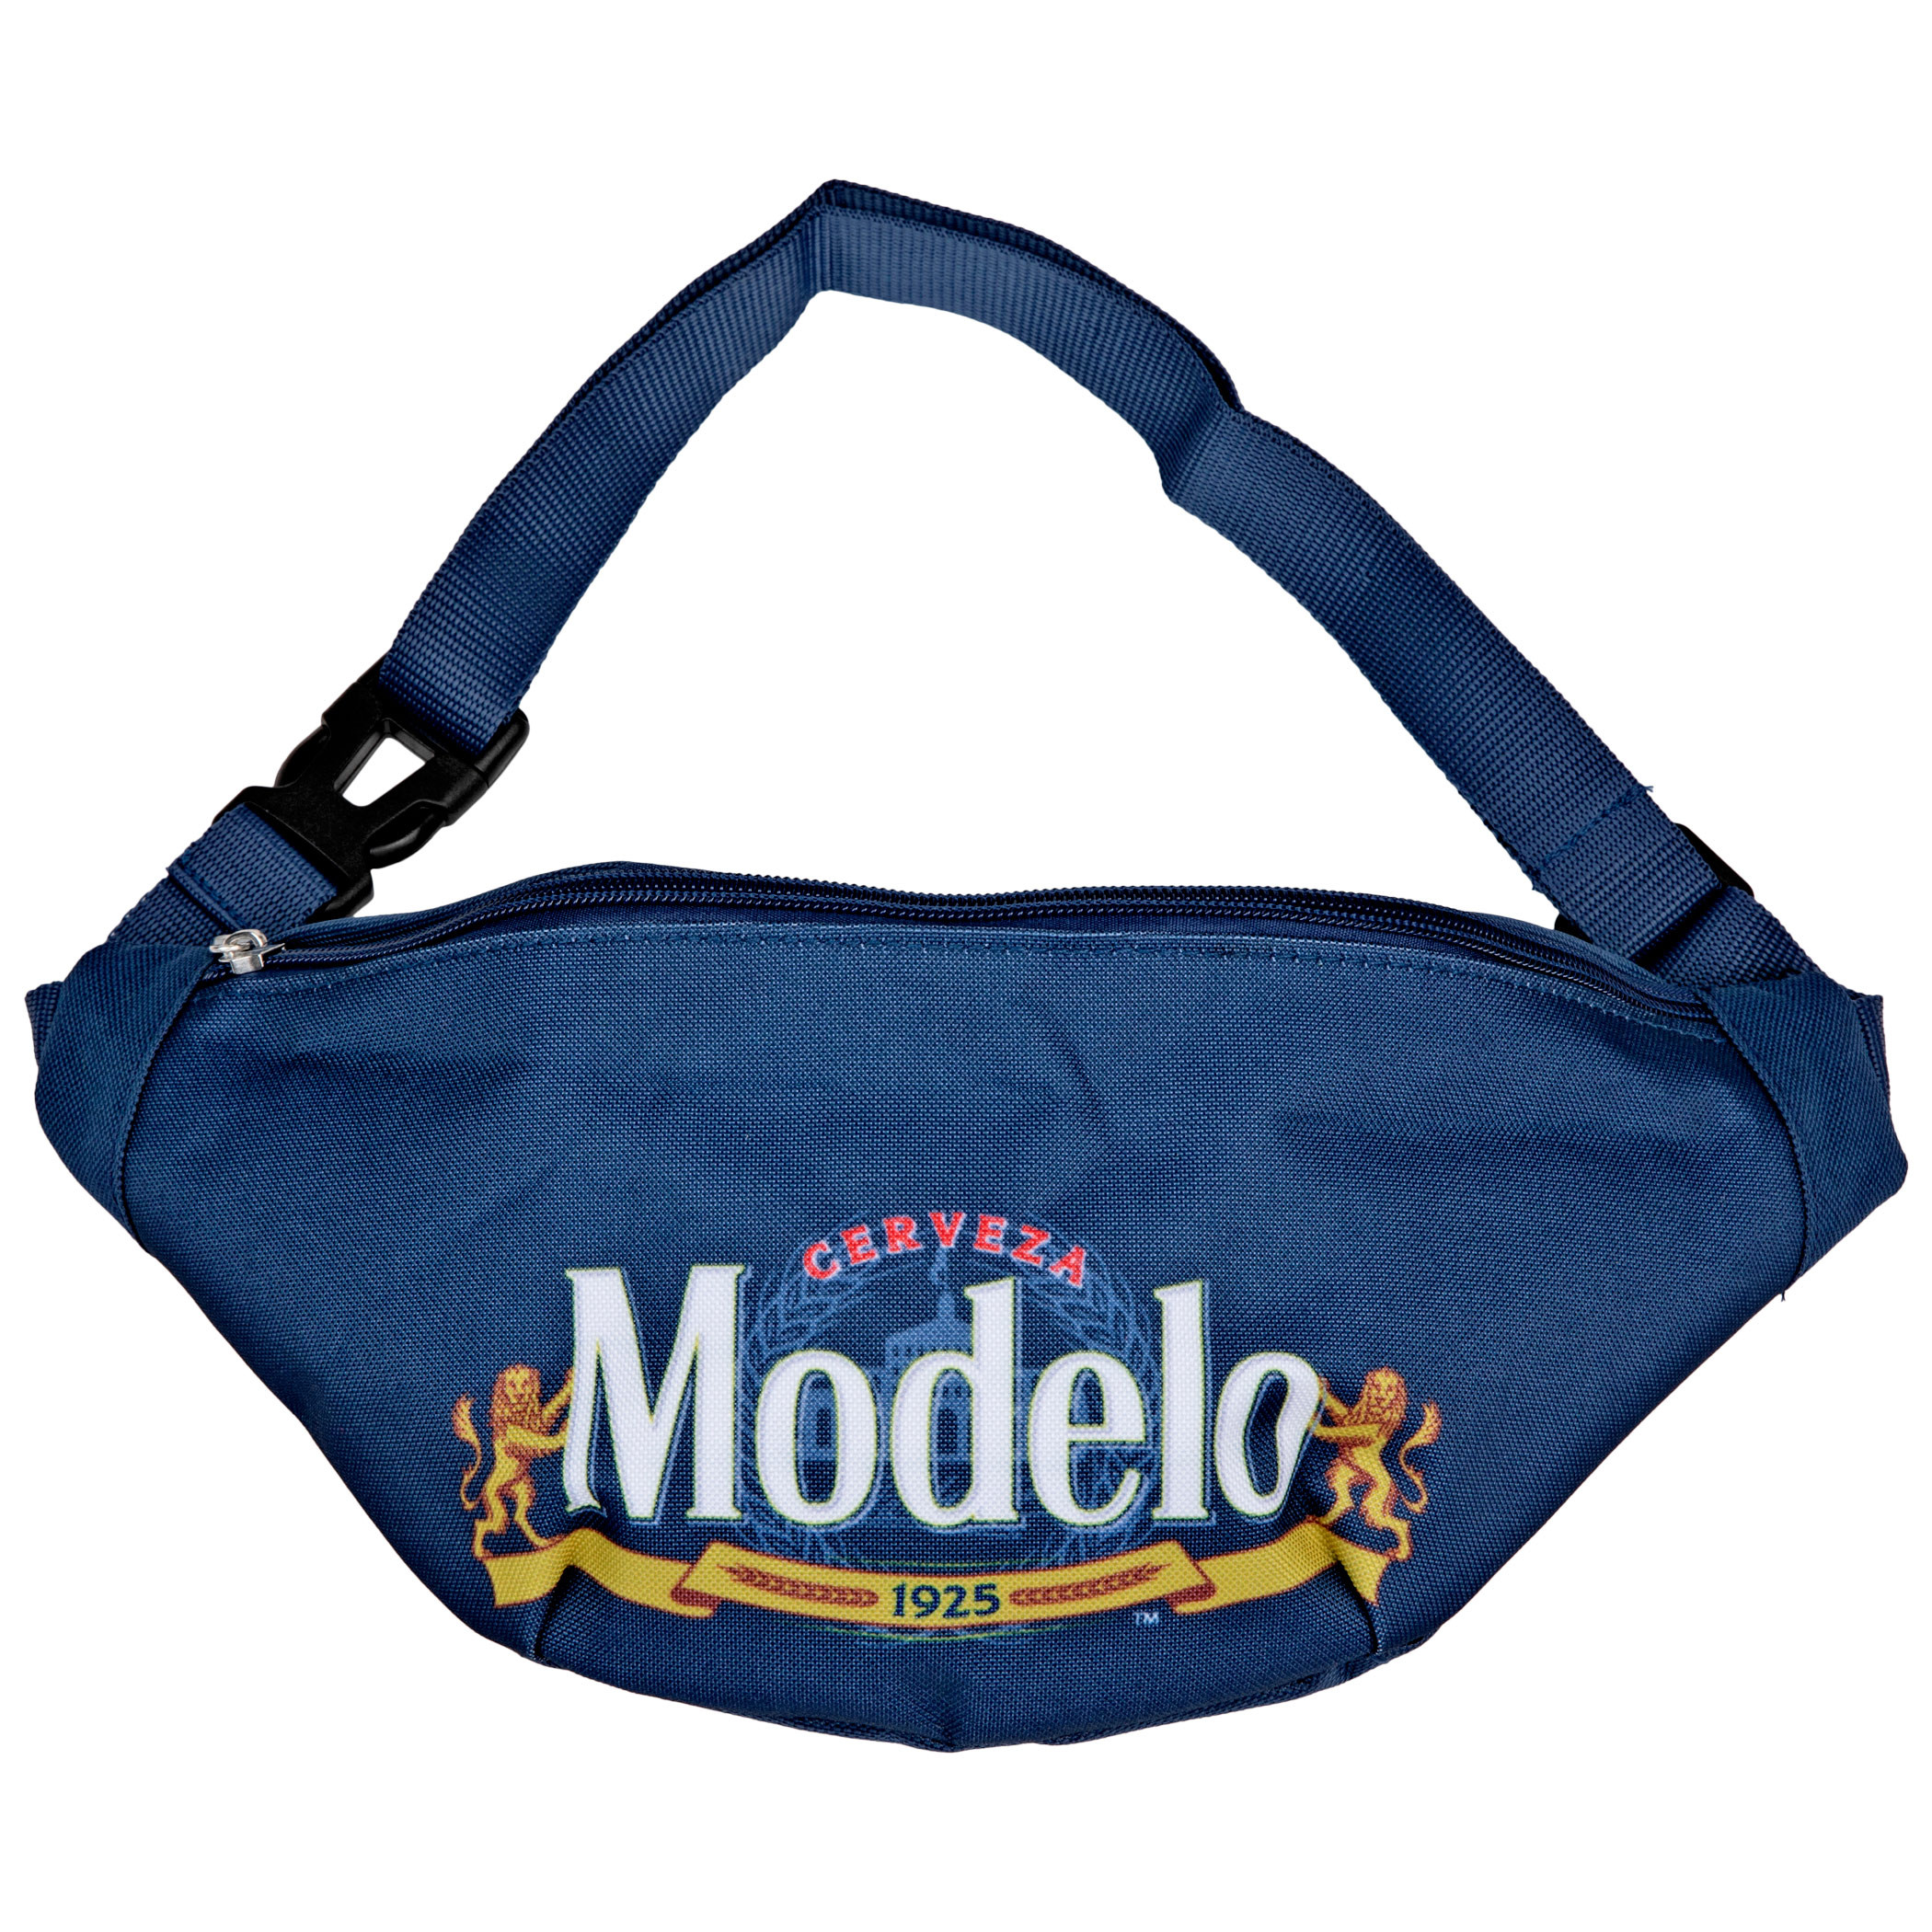 Modelo Especial Brand Label Fanny Pack